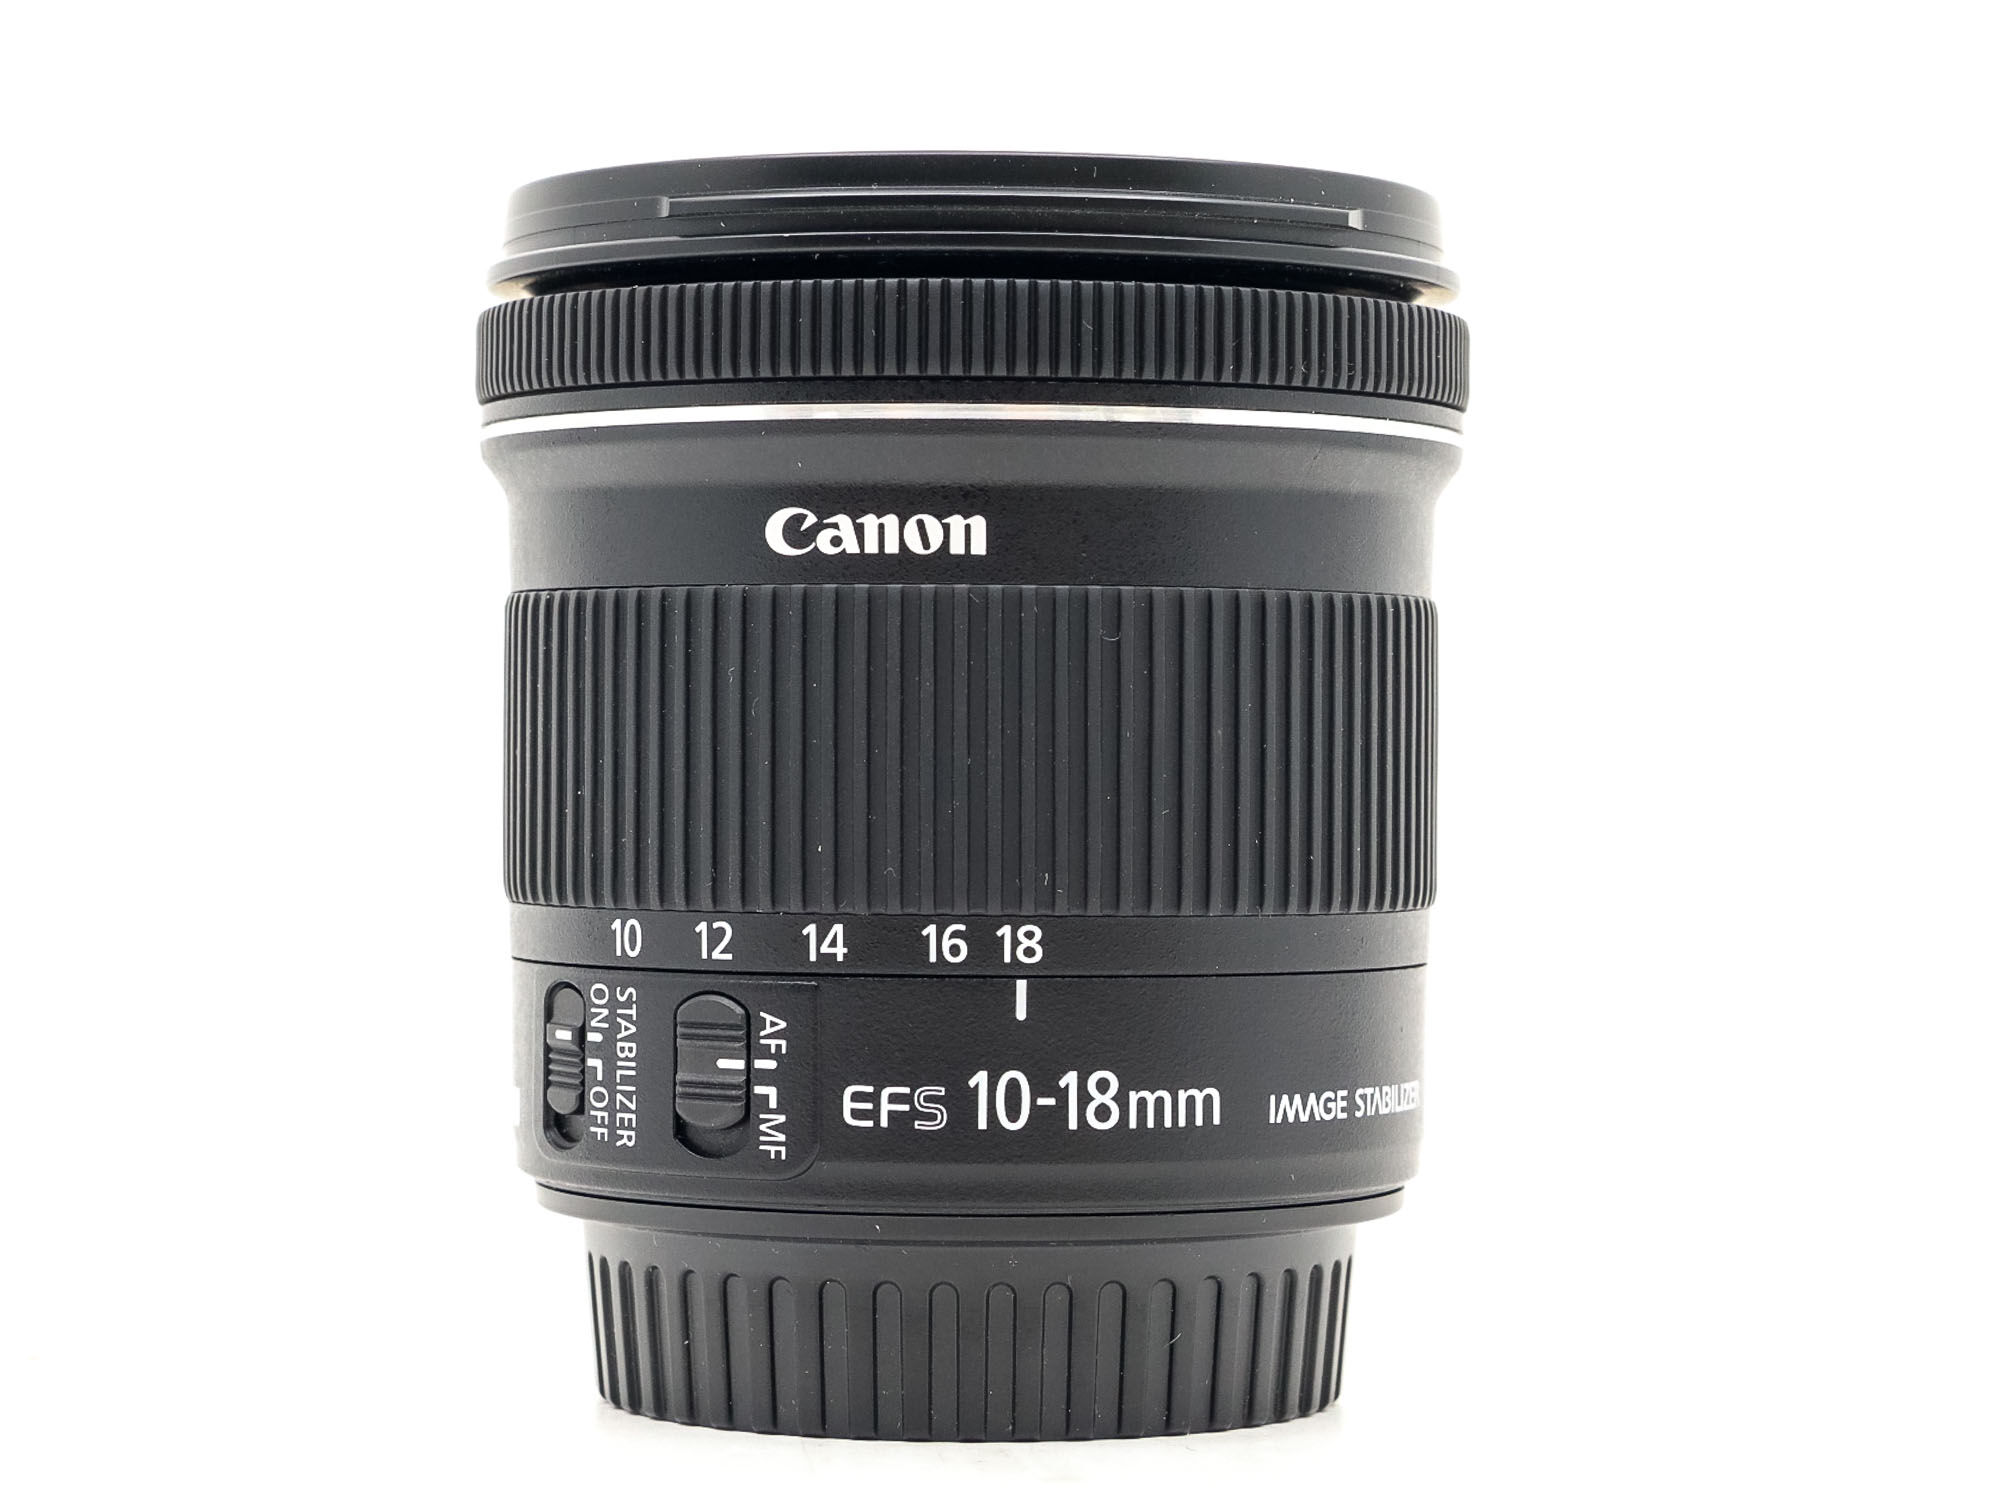 Canon EF-S 10-18mm f/4.5-5.6 IS STM (Condition: Like New)